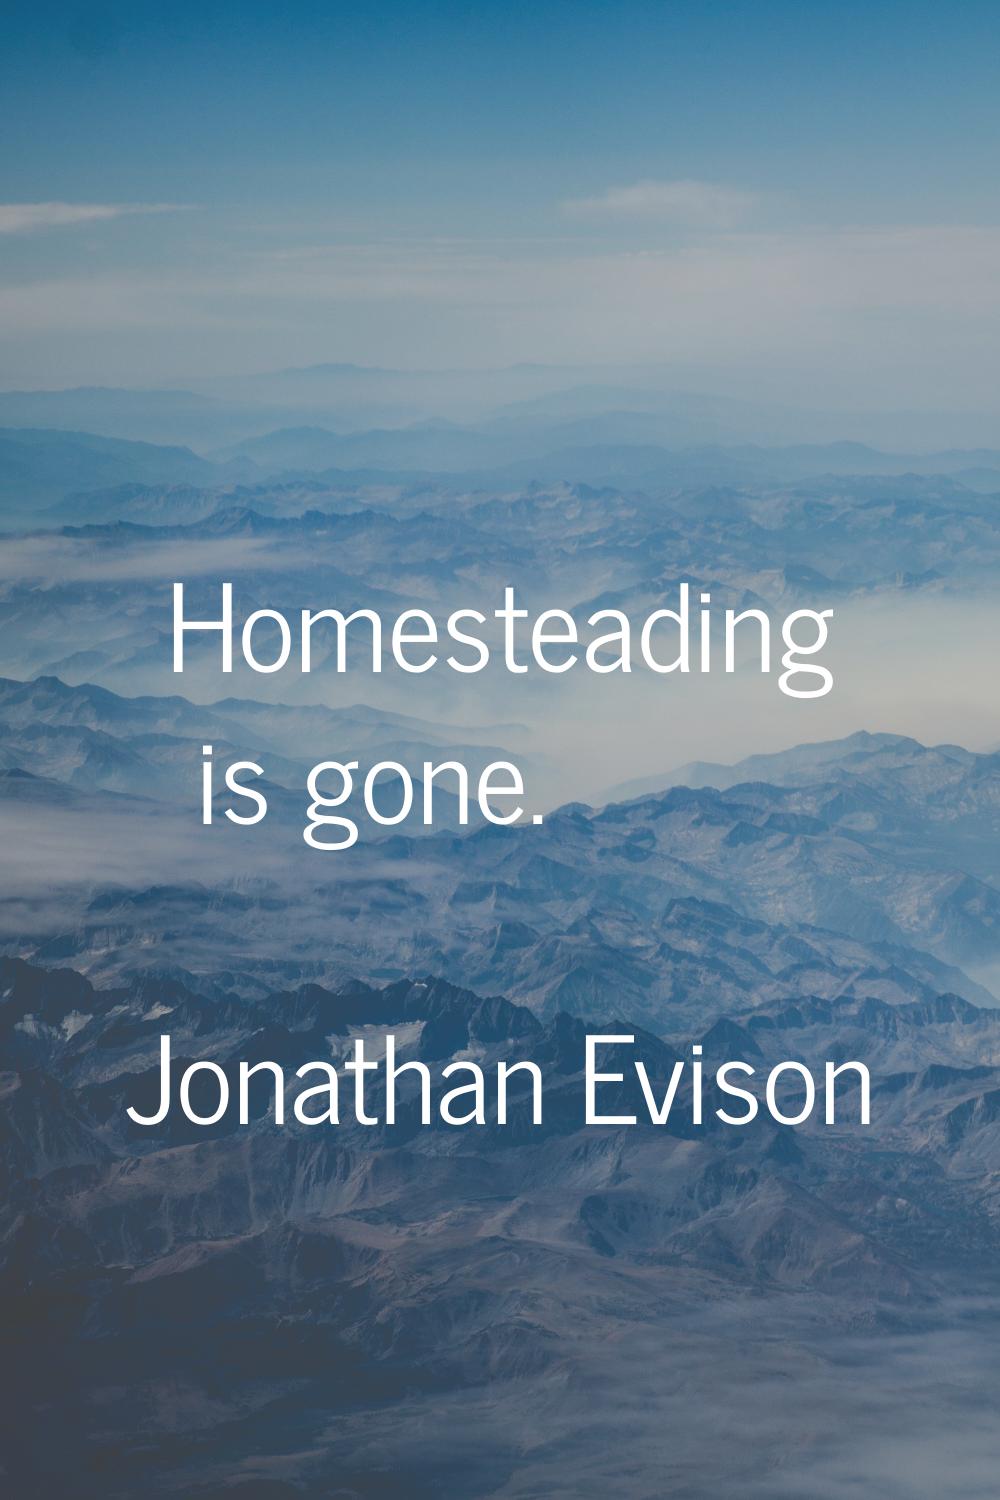 Homesteading is gone.